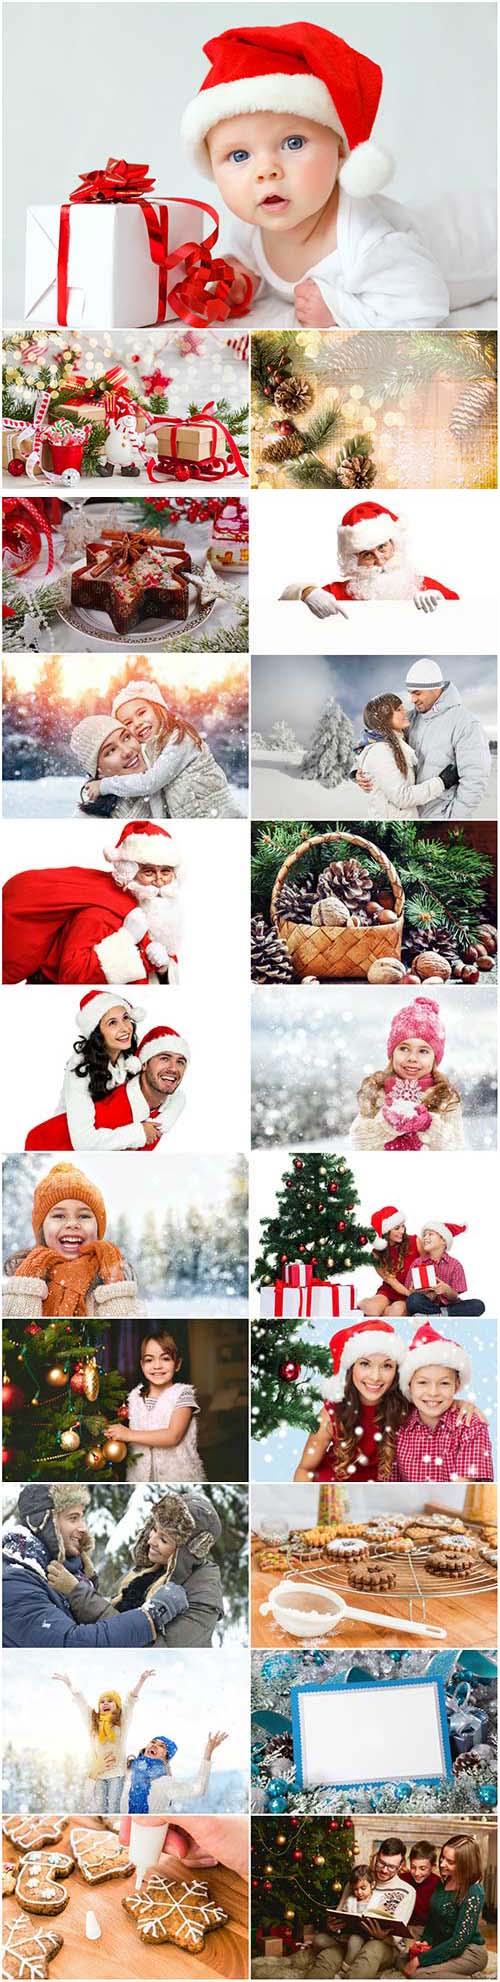 New Year and Christmas stock photos 90